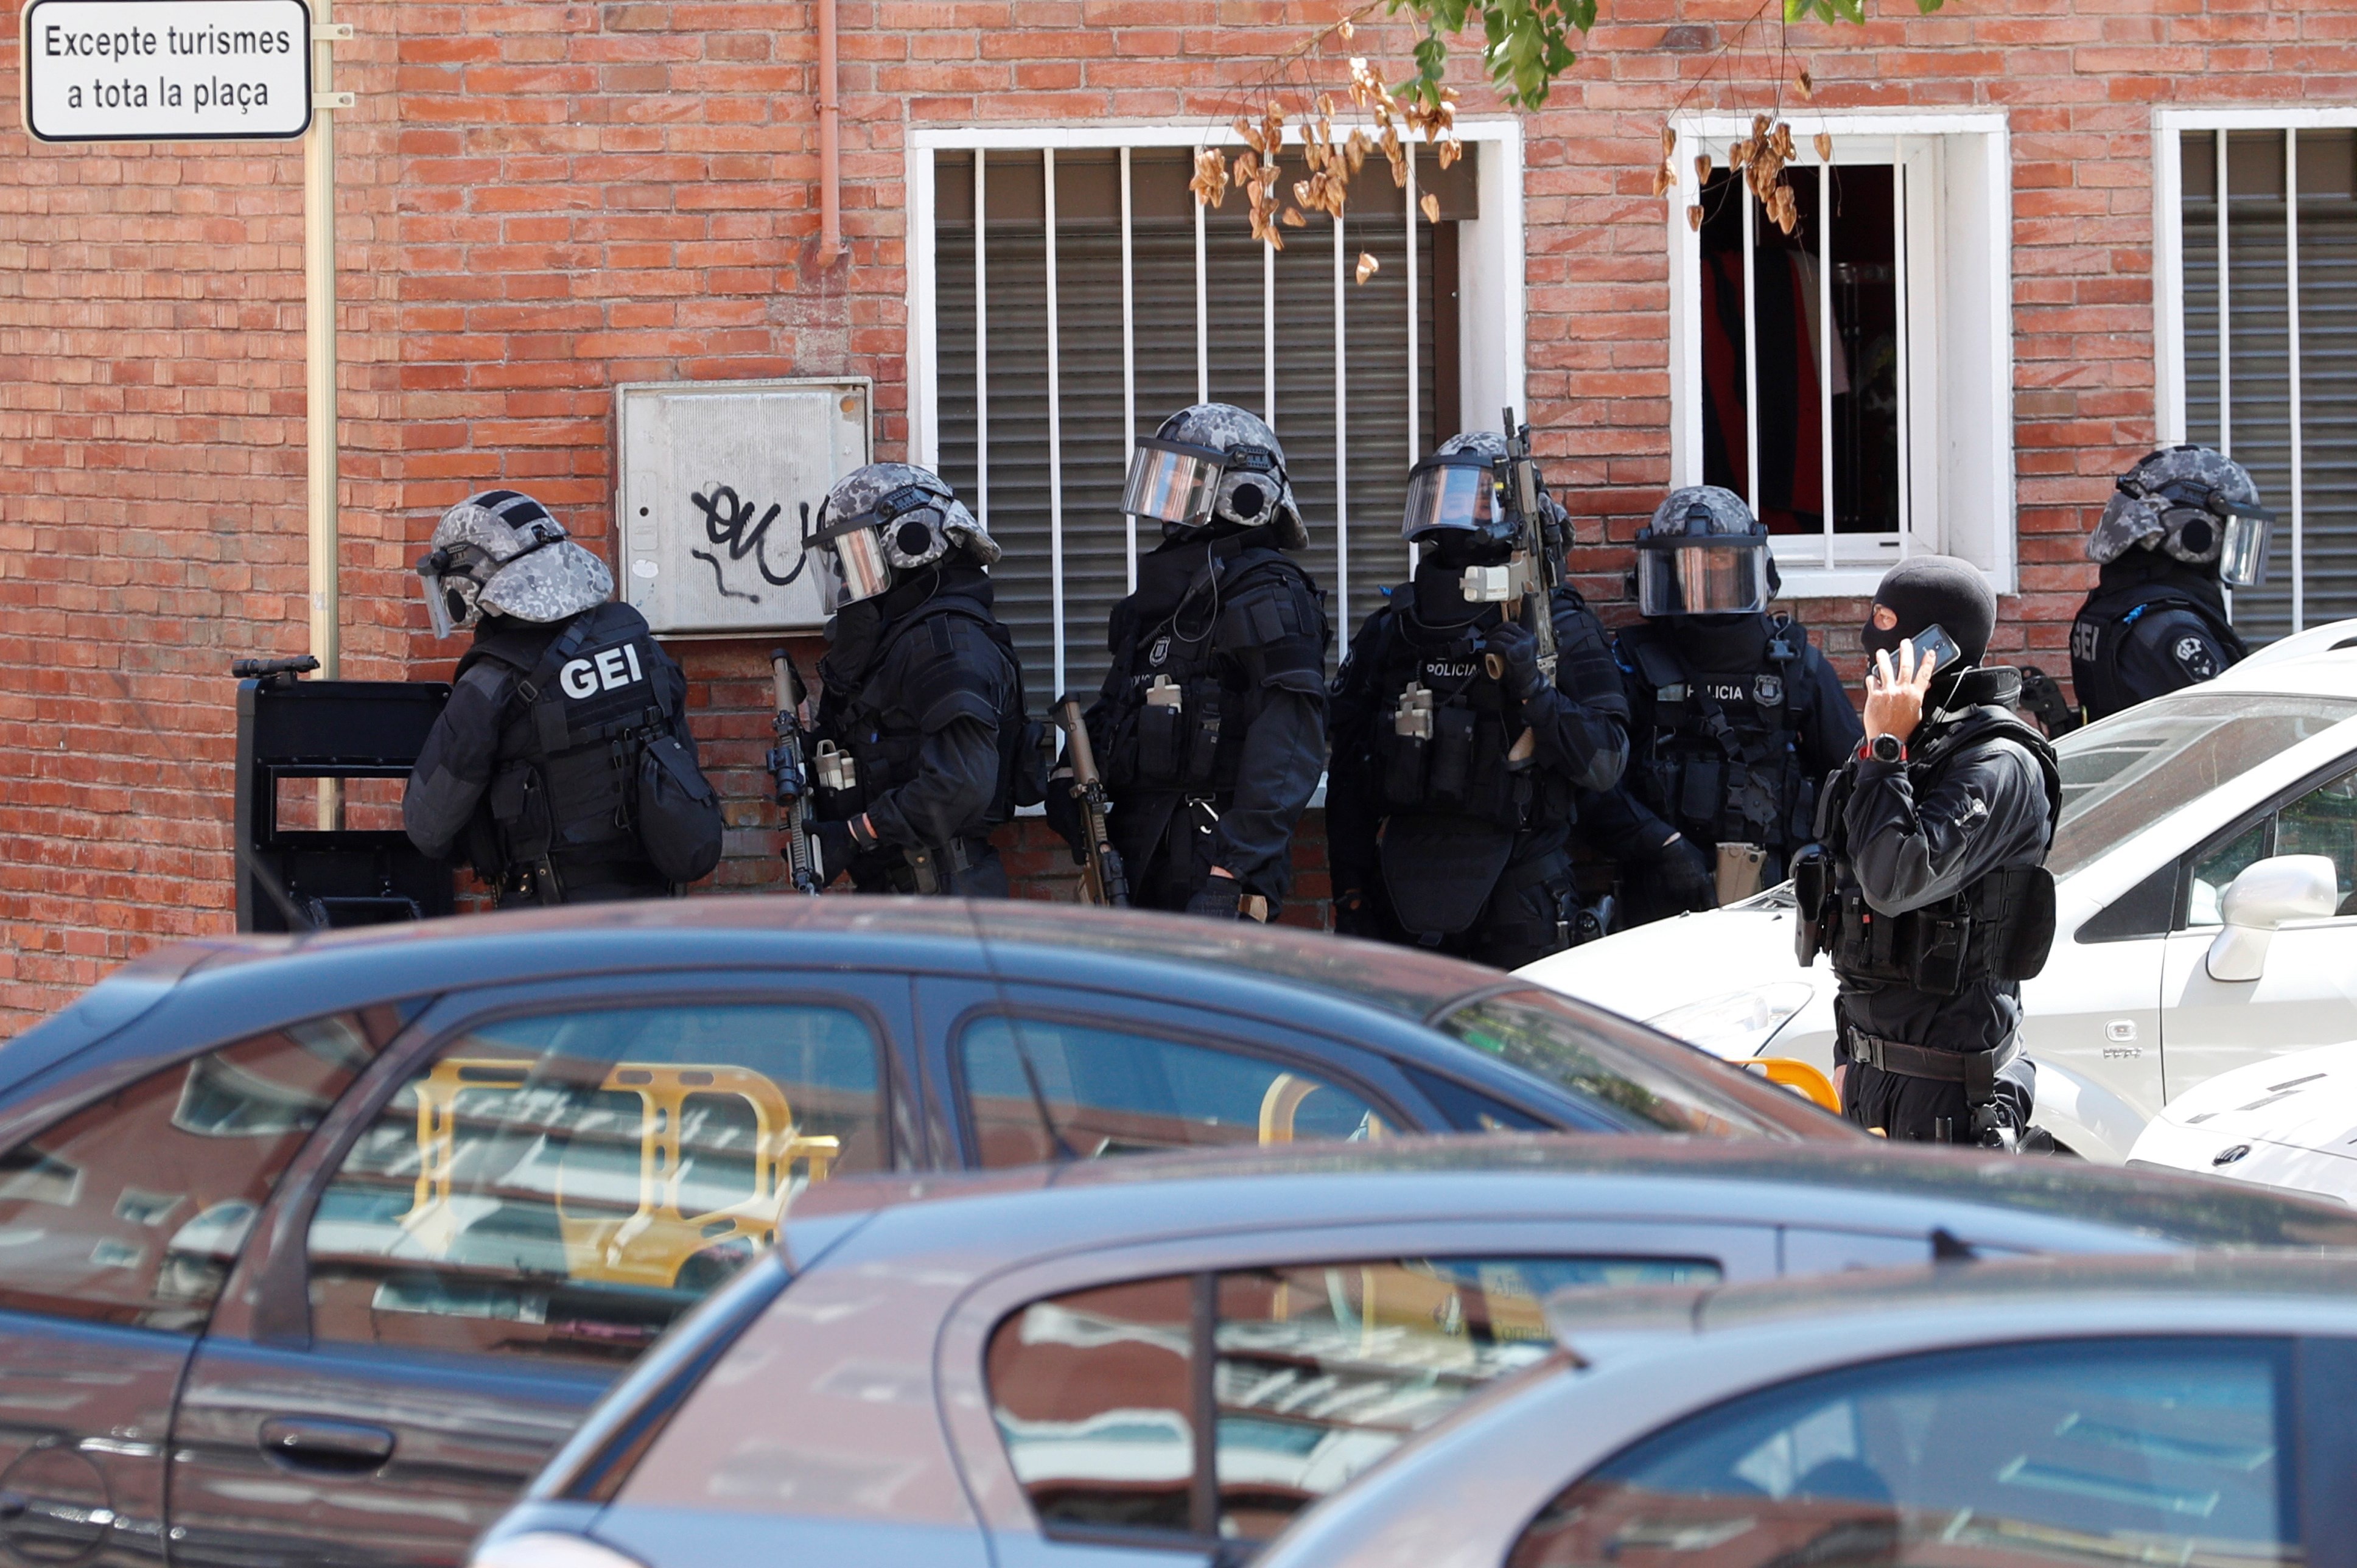 Officers take part in the search of the residential building where the attacker lived in Cornella, Spain. Photo: EPA-EFE